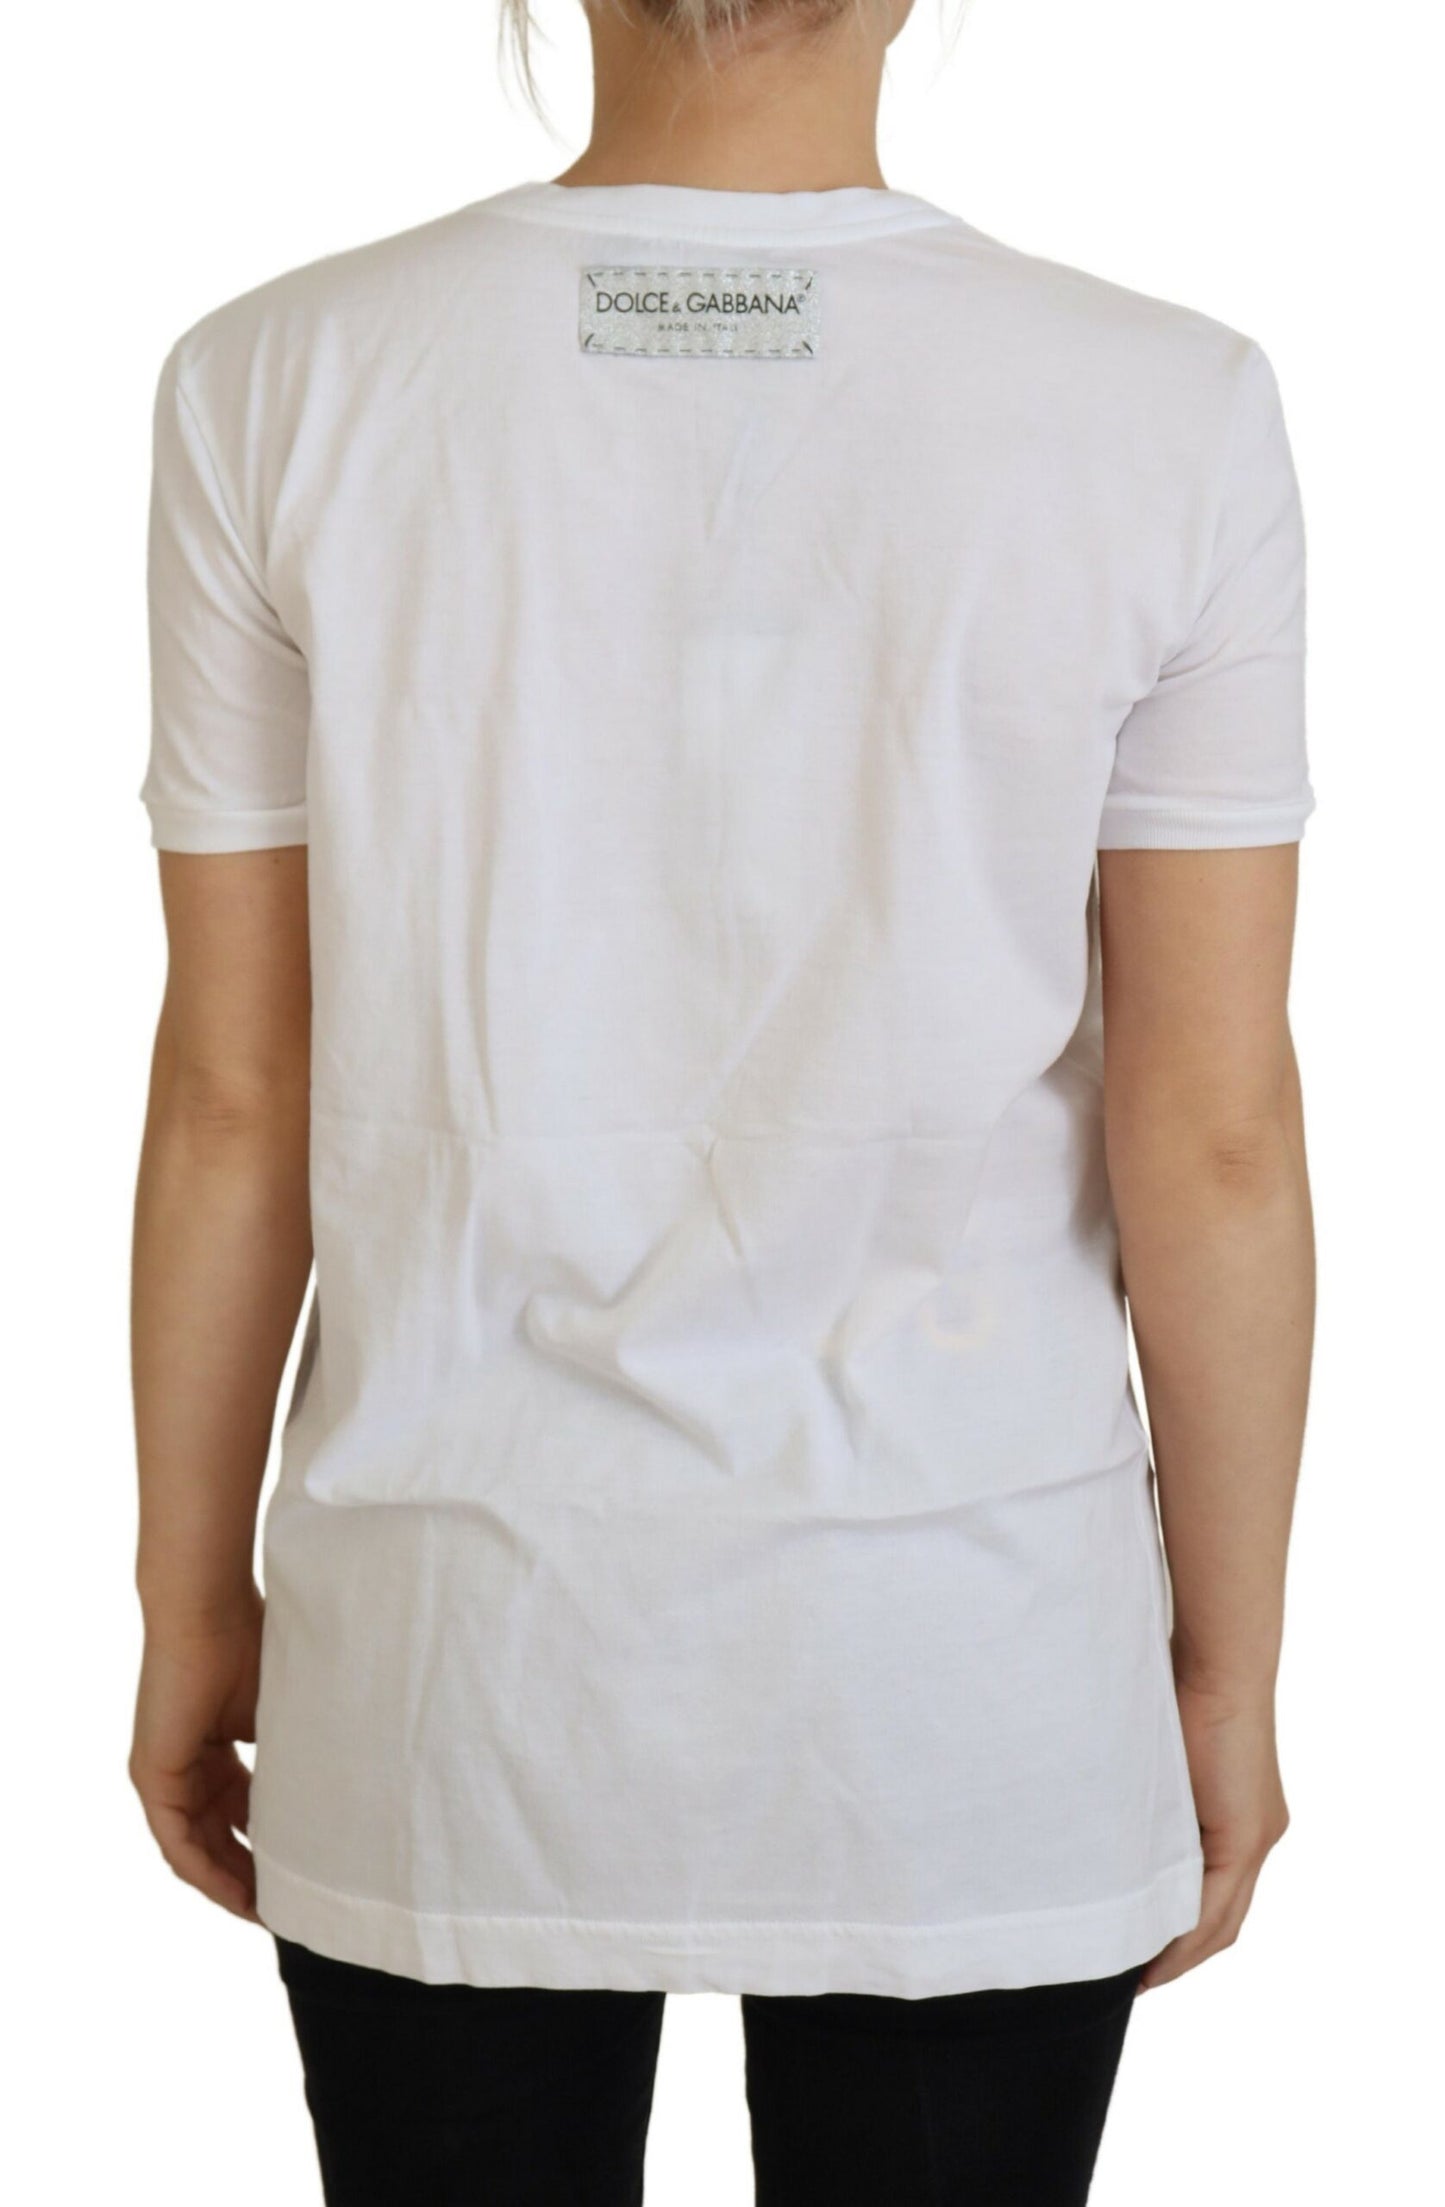 Elegant White Cotton Tee for Casual Chic Style